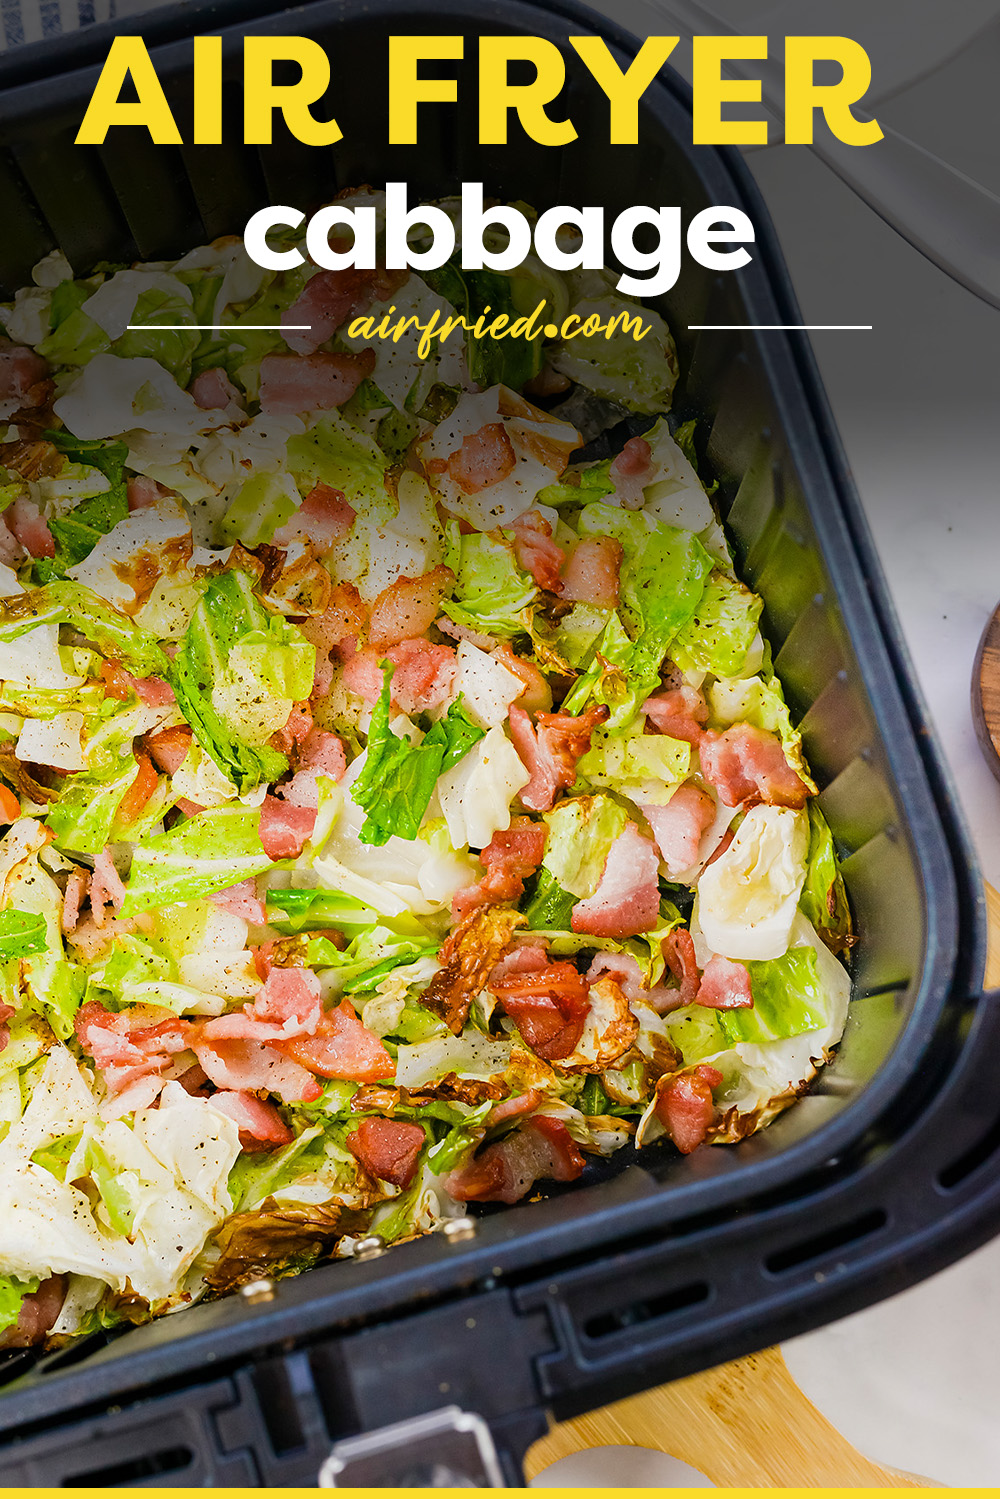 Air fryer fried cabbage is the best way to mix cabbage and bacon together!  The ease, texture, and taste is the BEST!